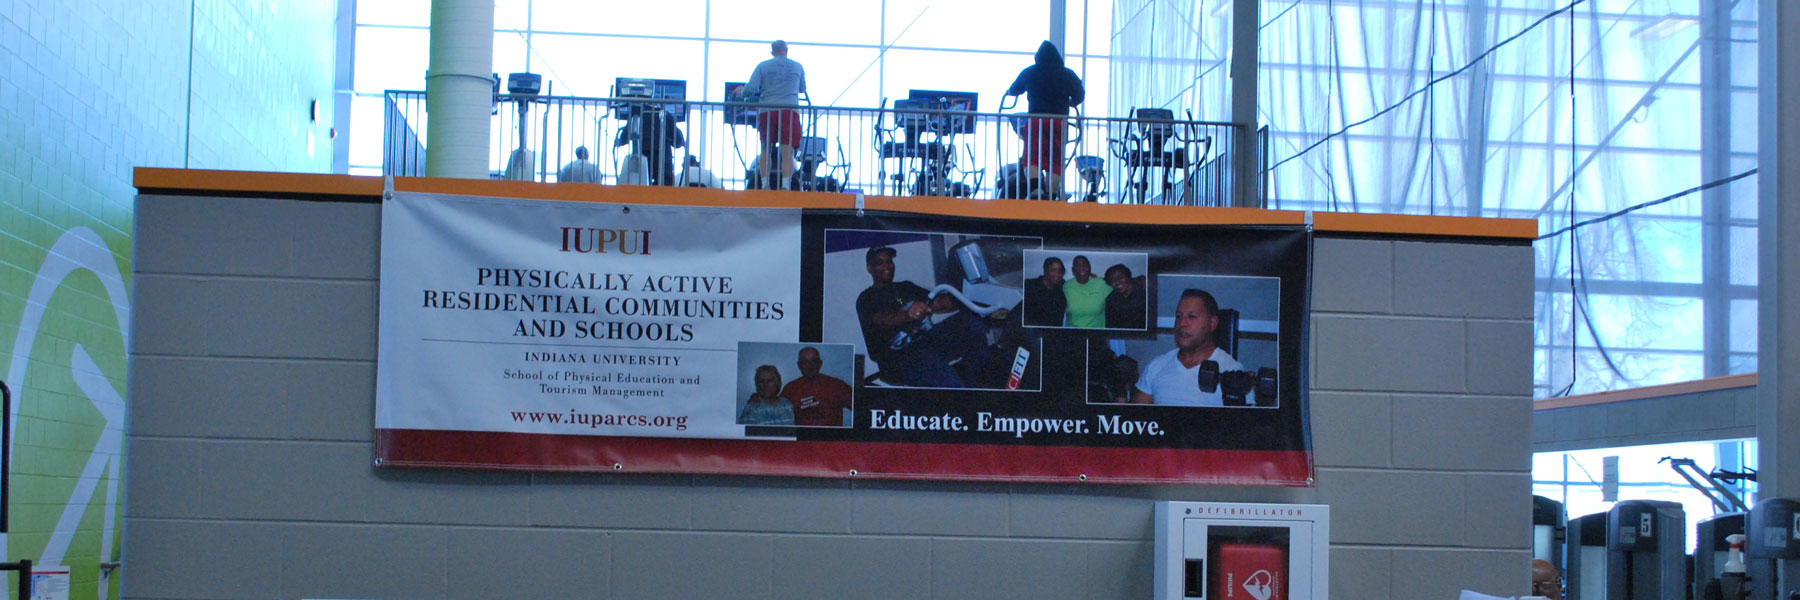 IUPUI Banner about physical activity and wellness located in a gym